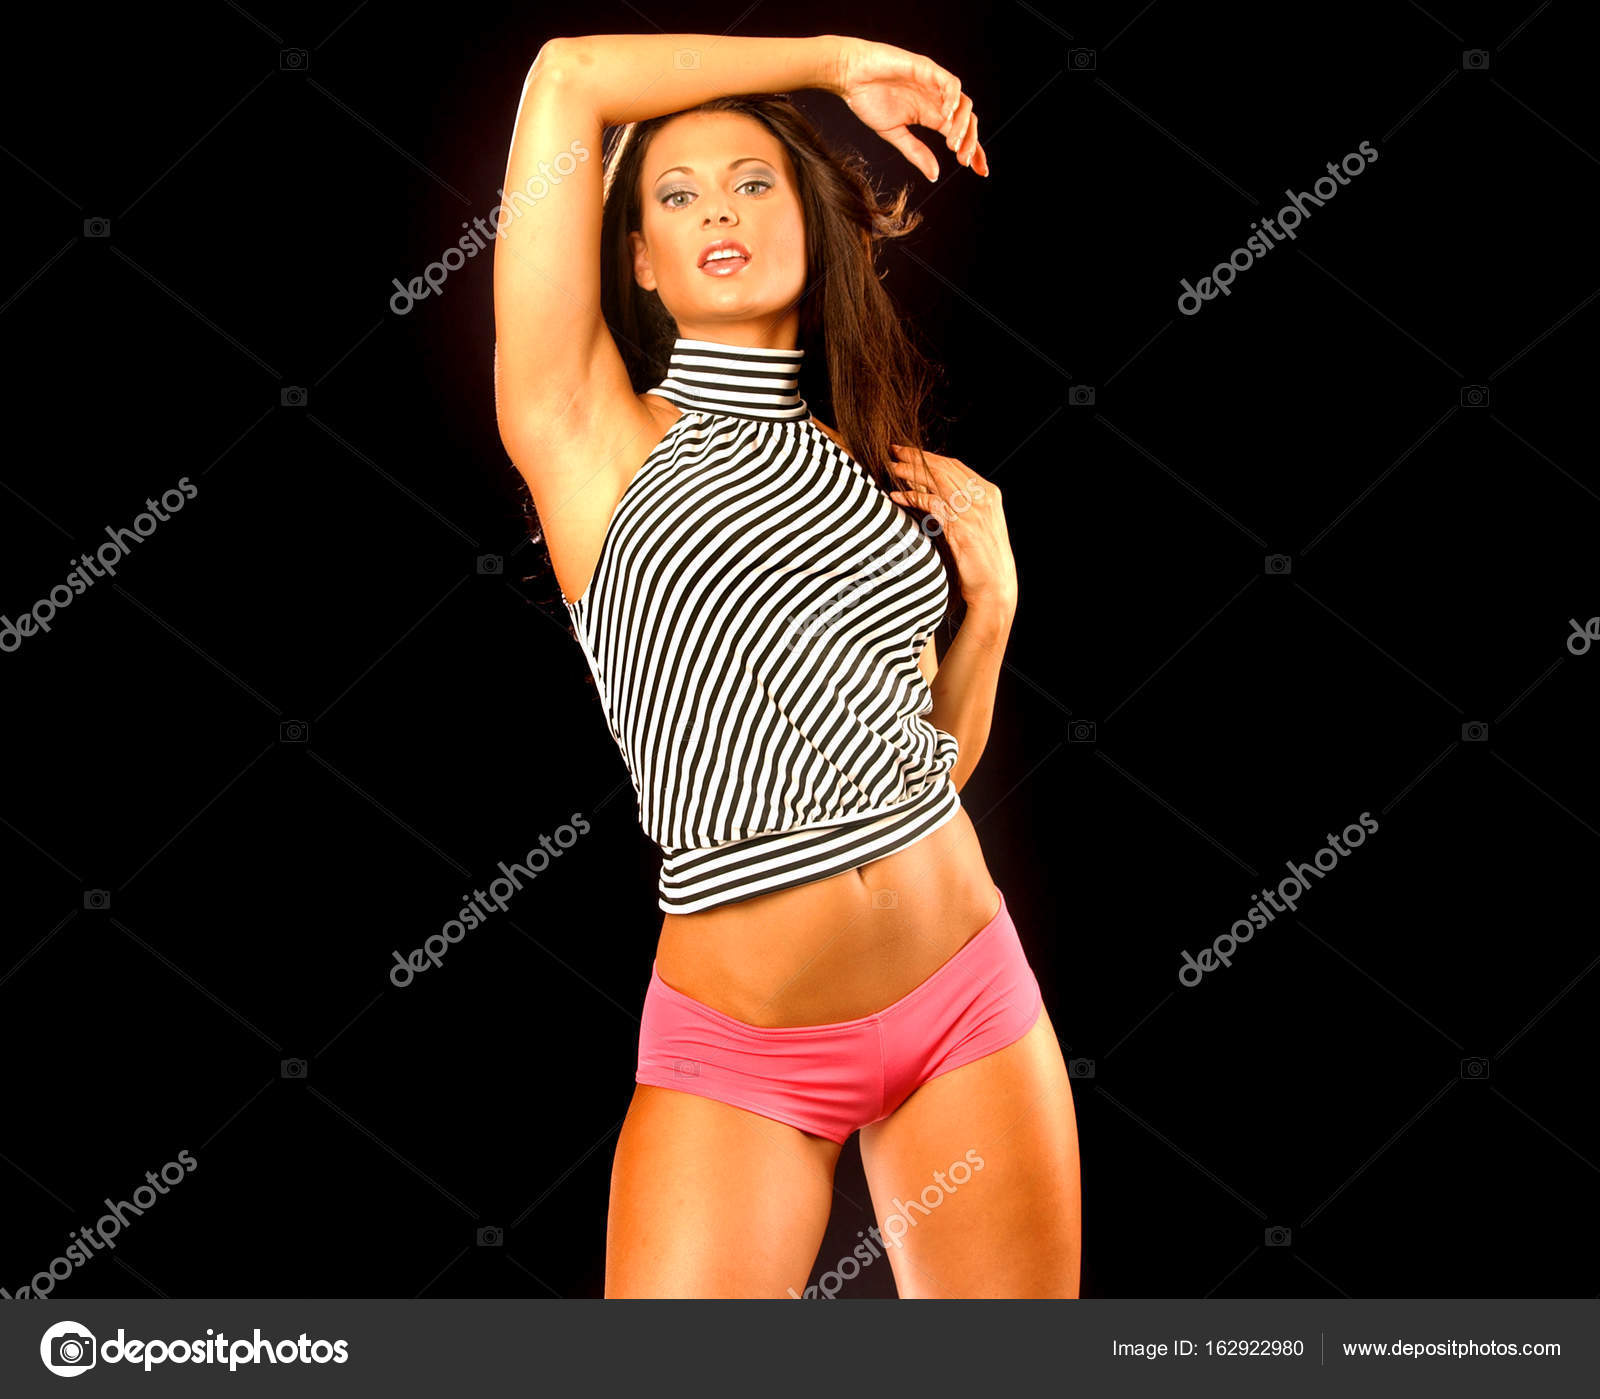 Black Wallpaper Sexy Brunette Black Stripped Top Stock Photo C Raykehoe